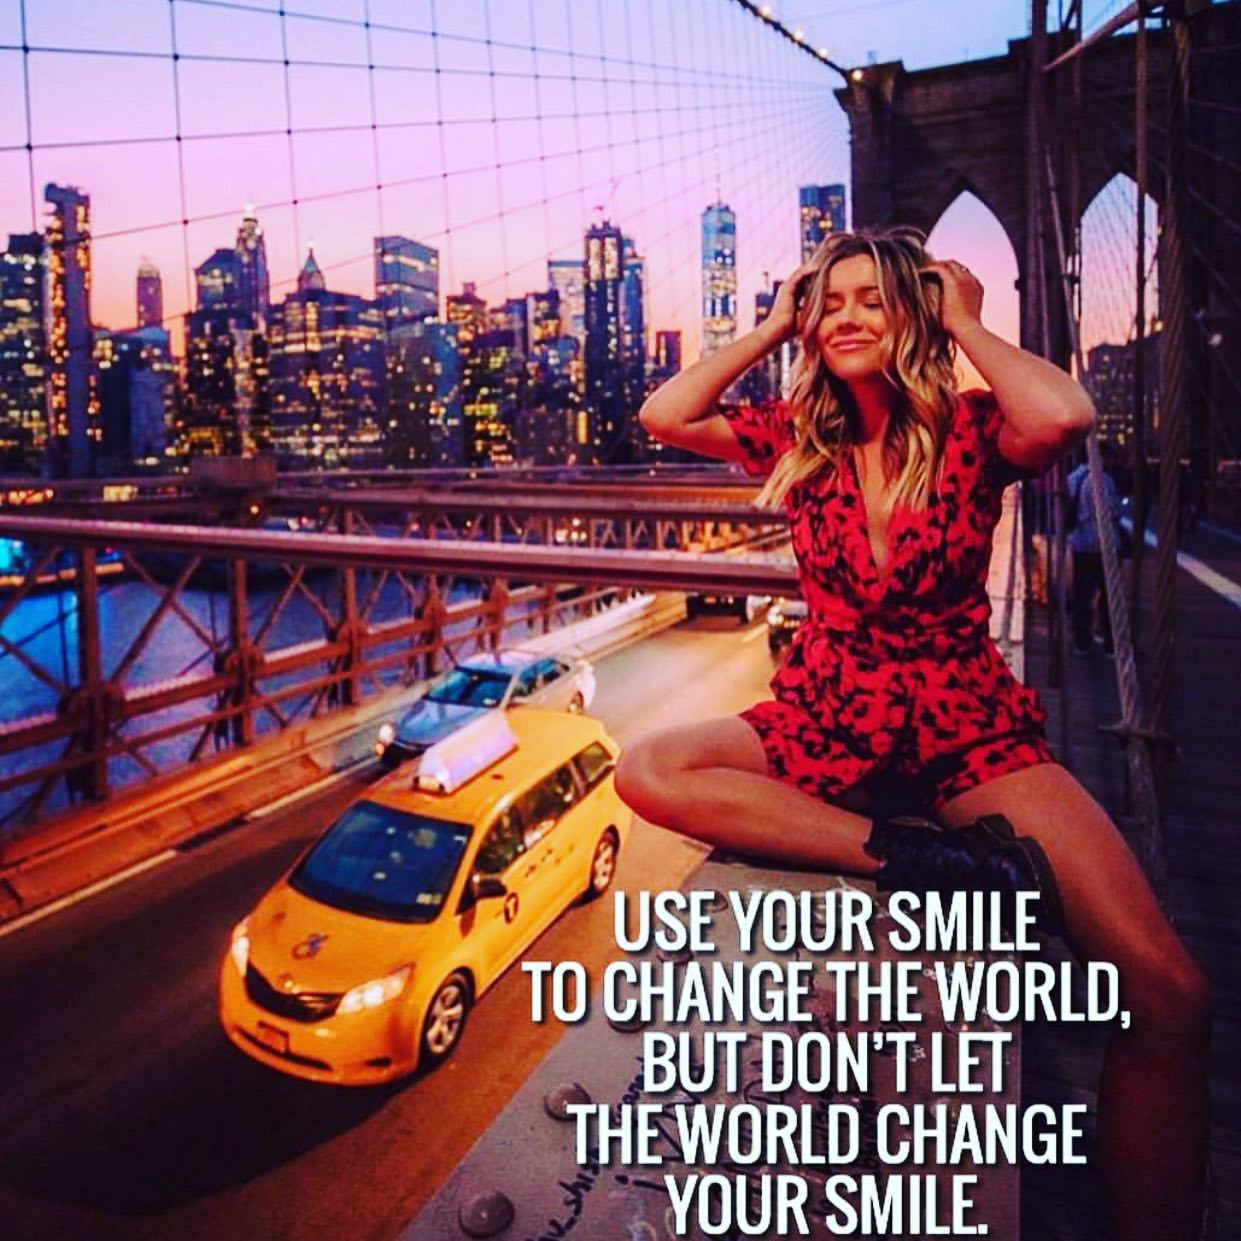 Use your smile to change the world, but don't let the world change your smile.